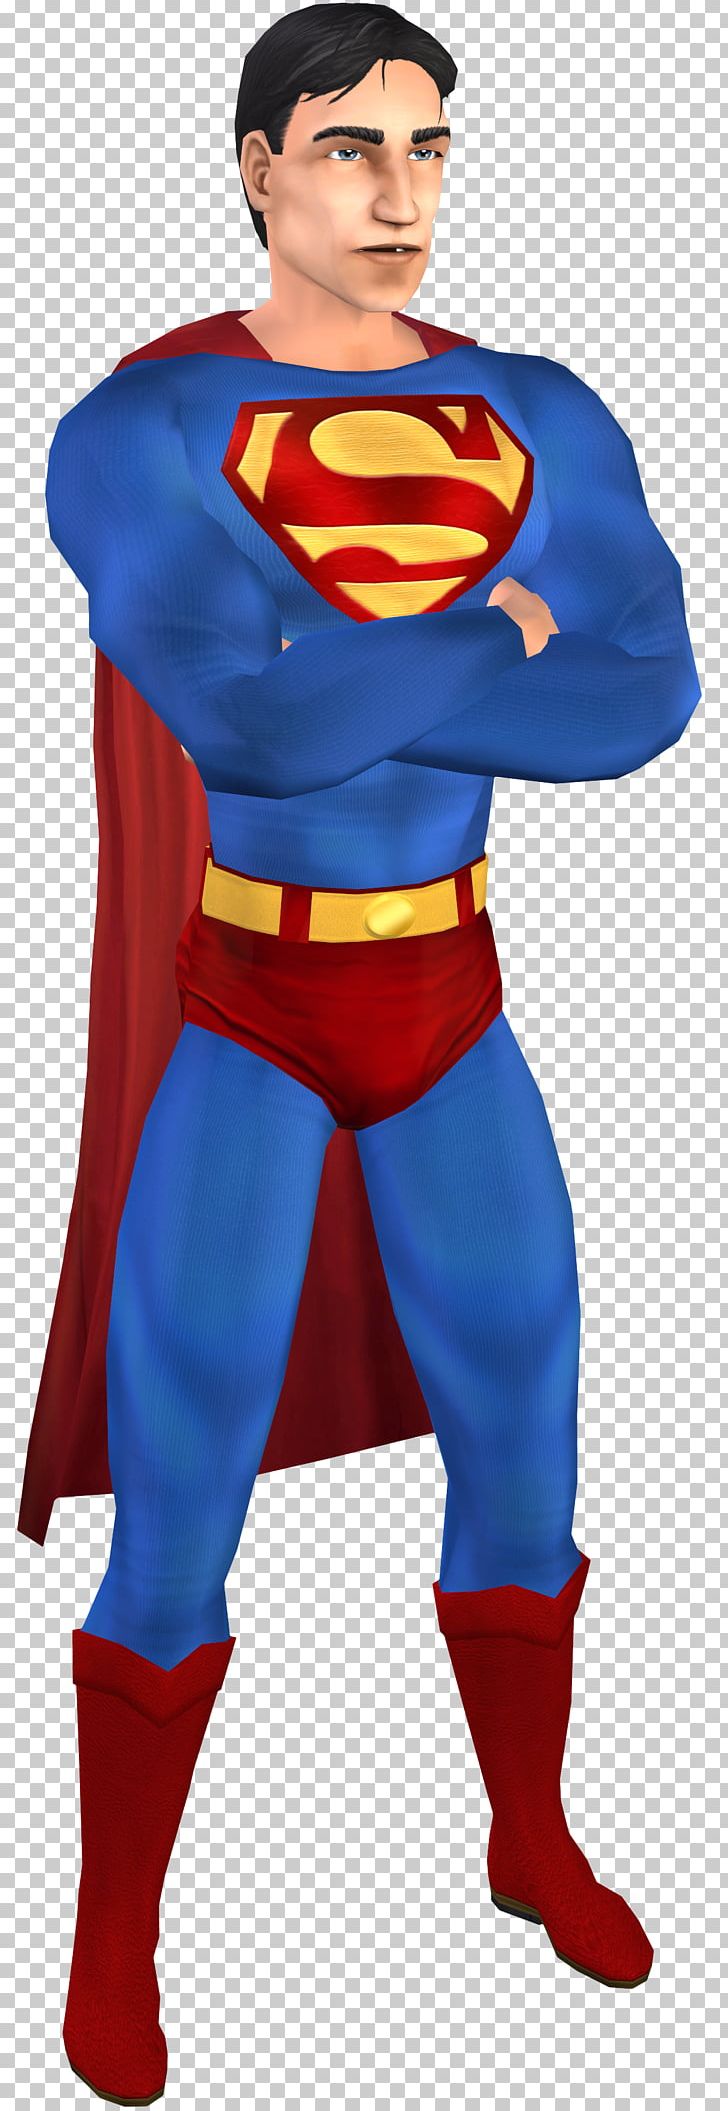 The Sims 2 Superman Art Milkshape 3D The Price Is Right PNG, Clipart, Art, Artist, Comic Book, Comics, Costume Free PNG Download